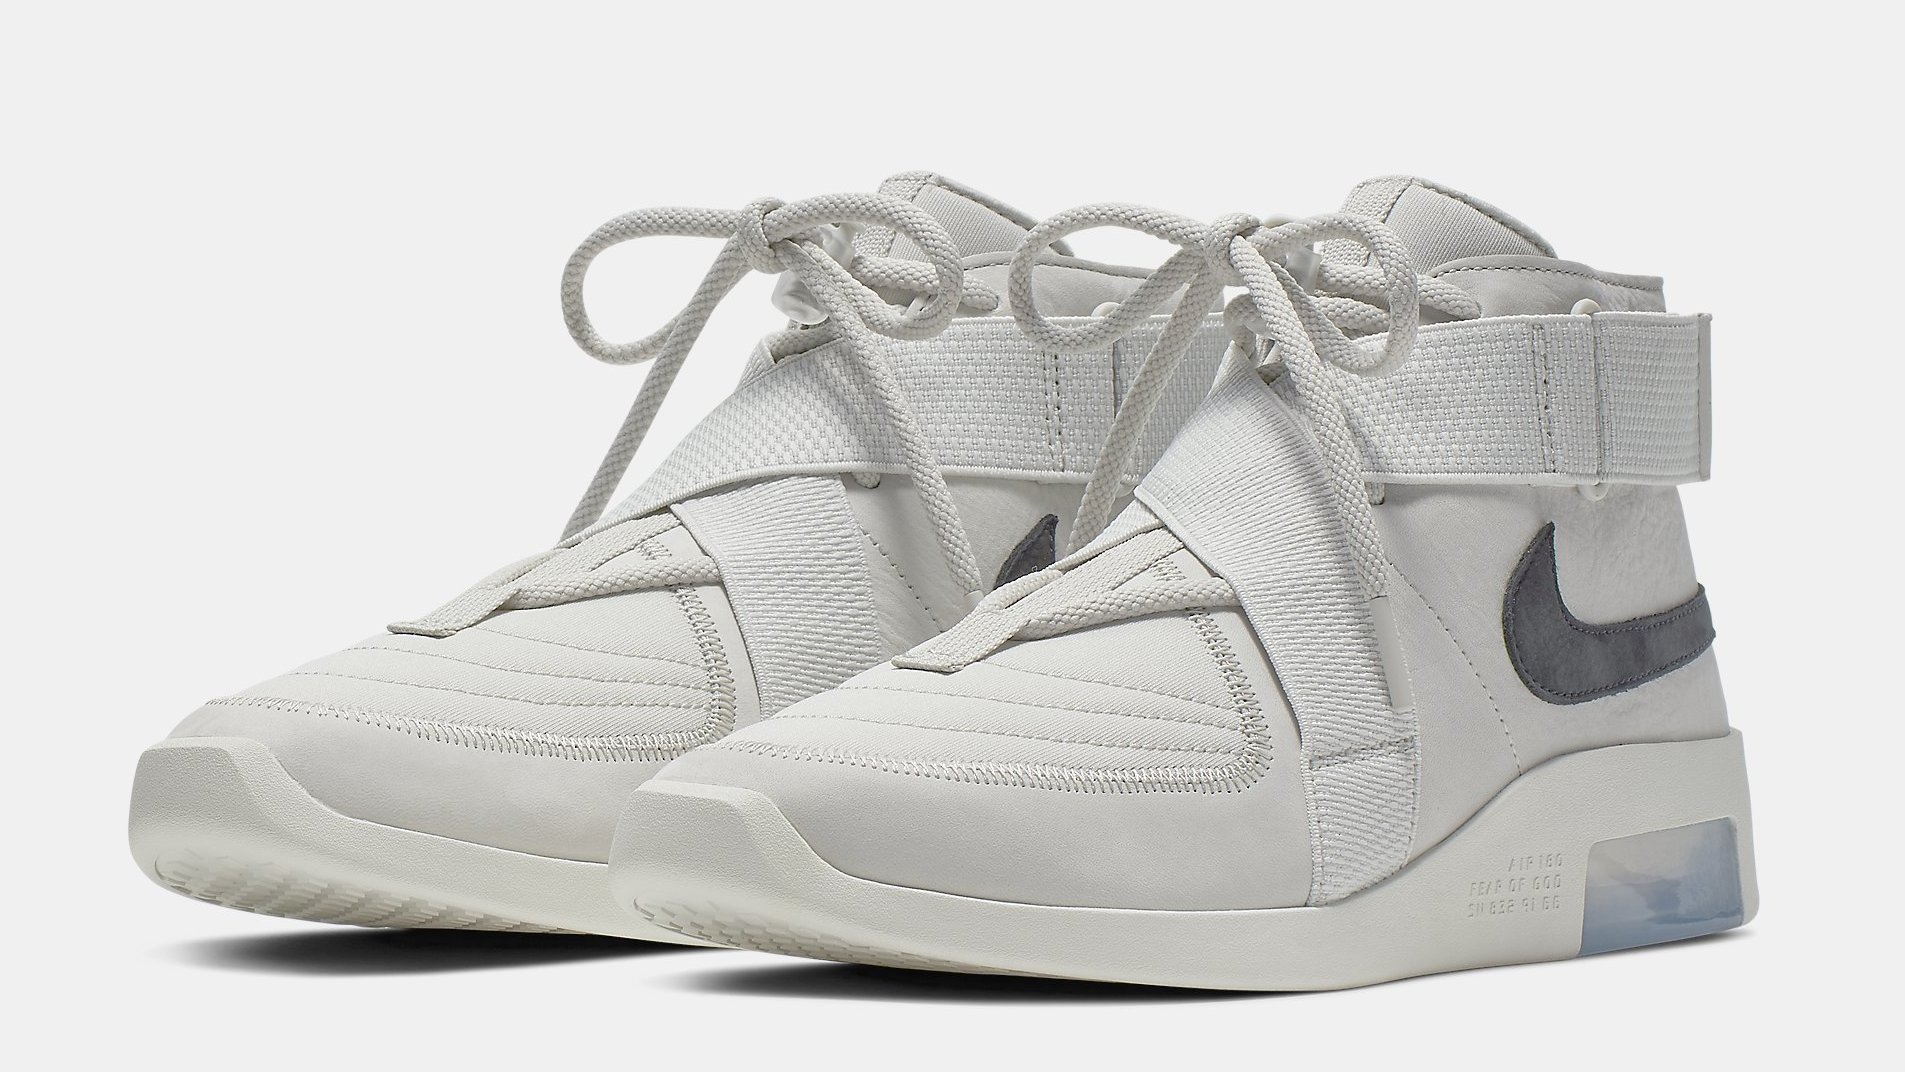 An Official Look at the Upcoming Nike Air Fear of God 180 | Complex